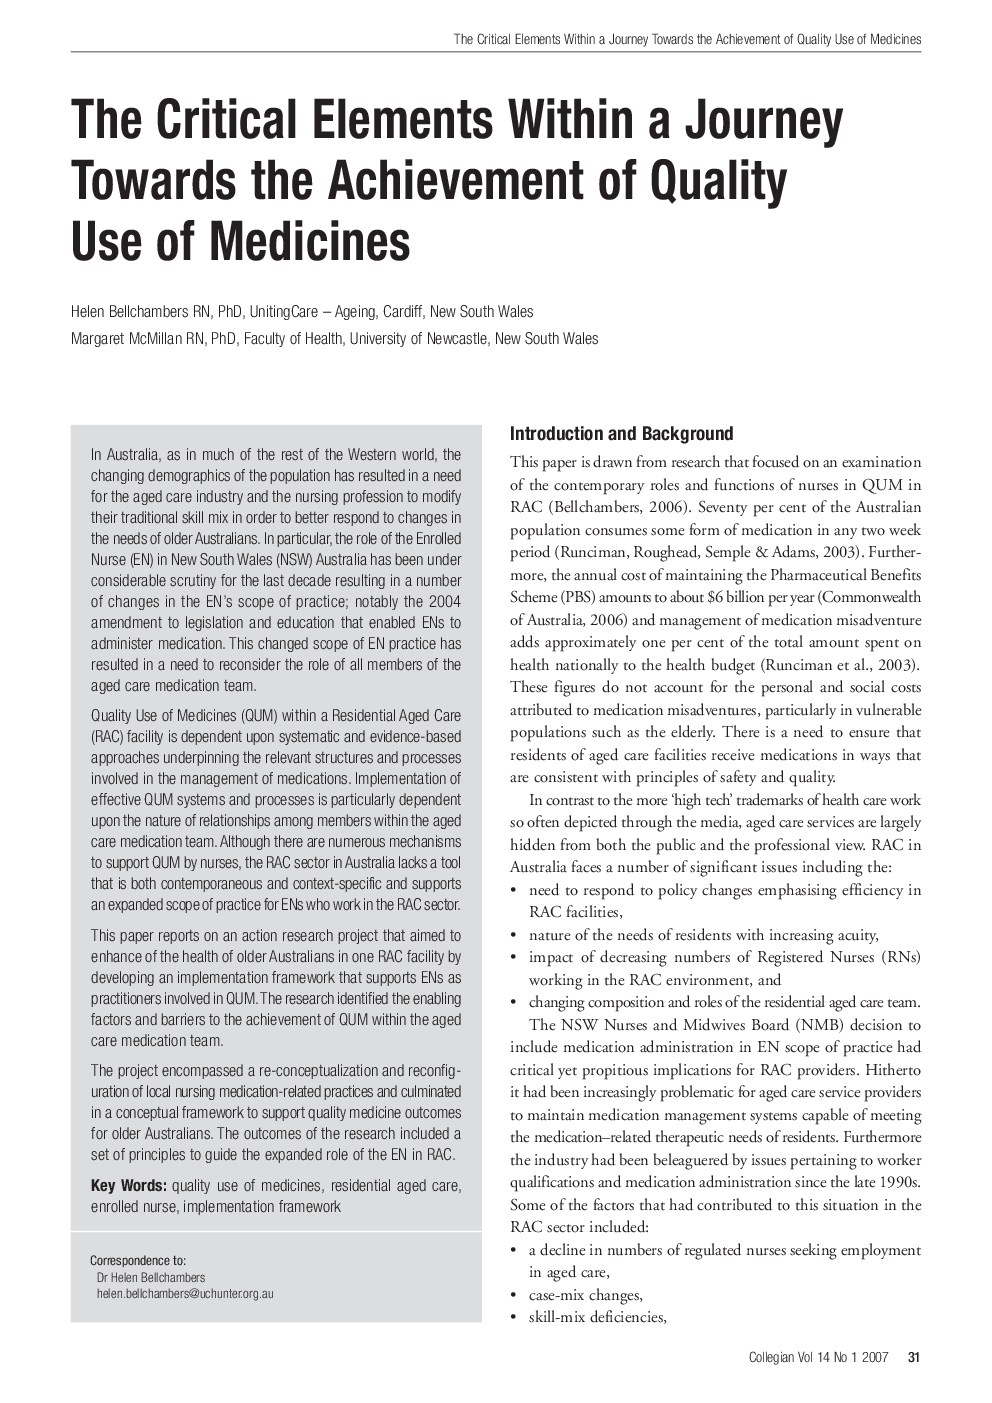 The Critical Elements Within a Journey Towards the Achievement of Quality Use of Medicines